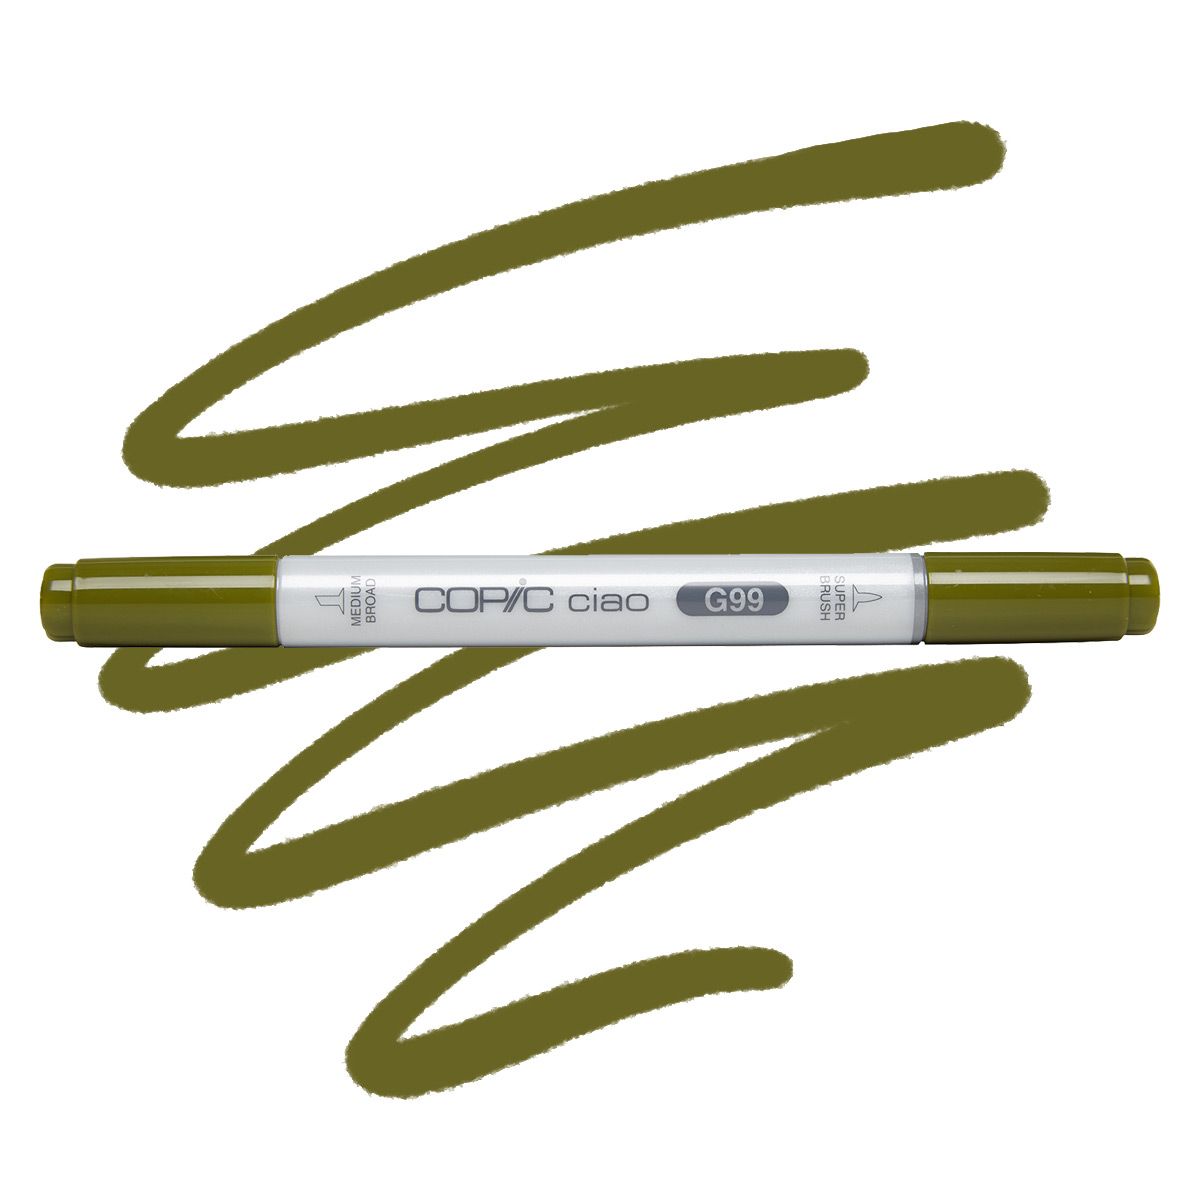 COPIC Ciao Marker G99 - Olive